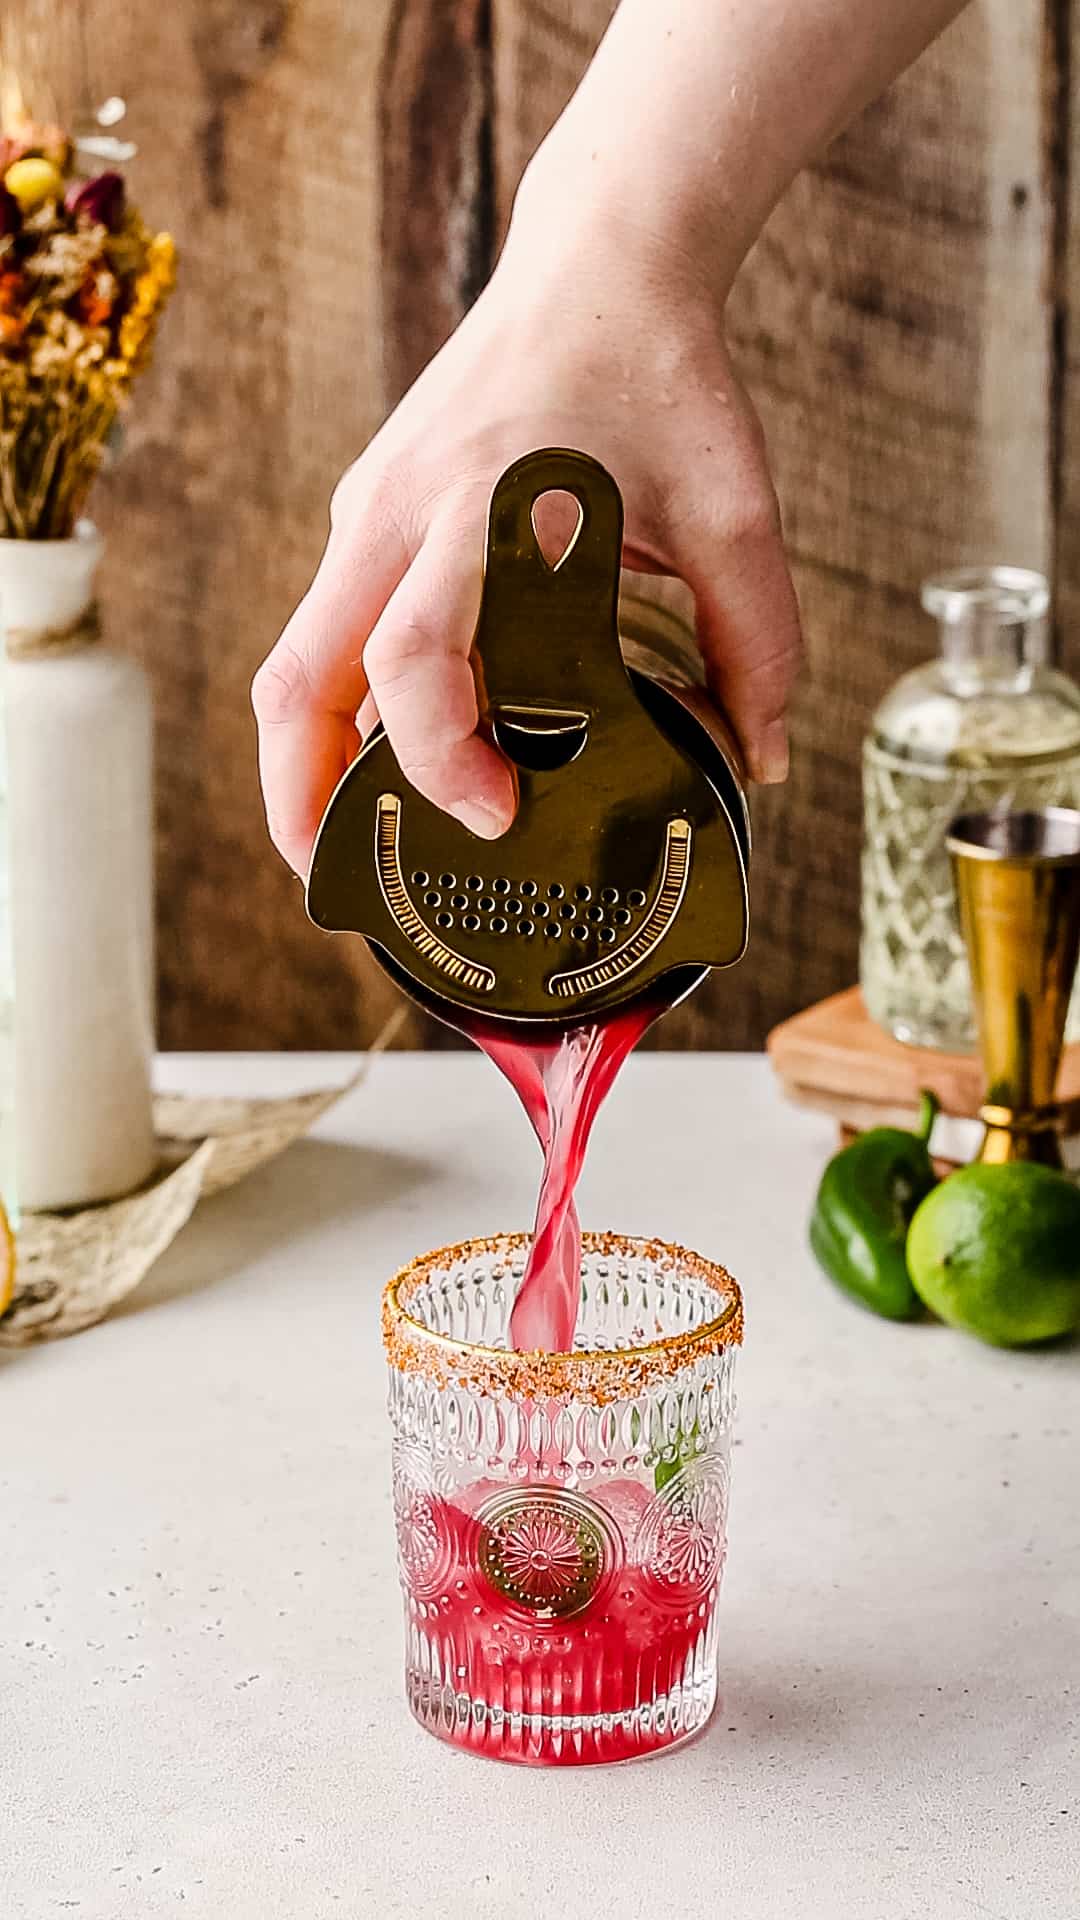 Straining a red colored drink into a cocktail glss.